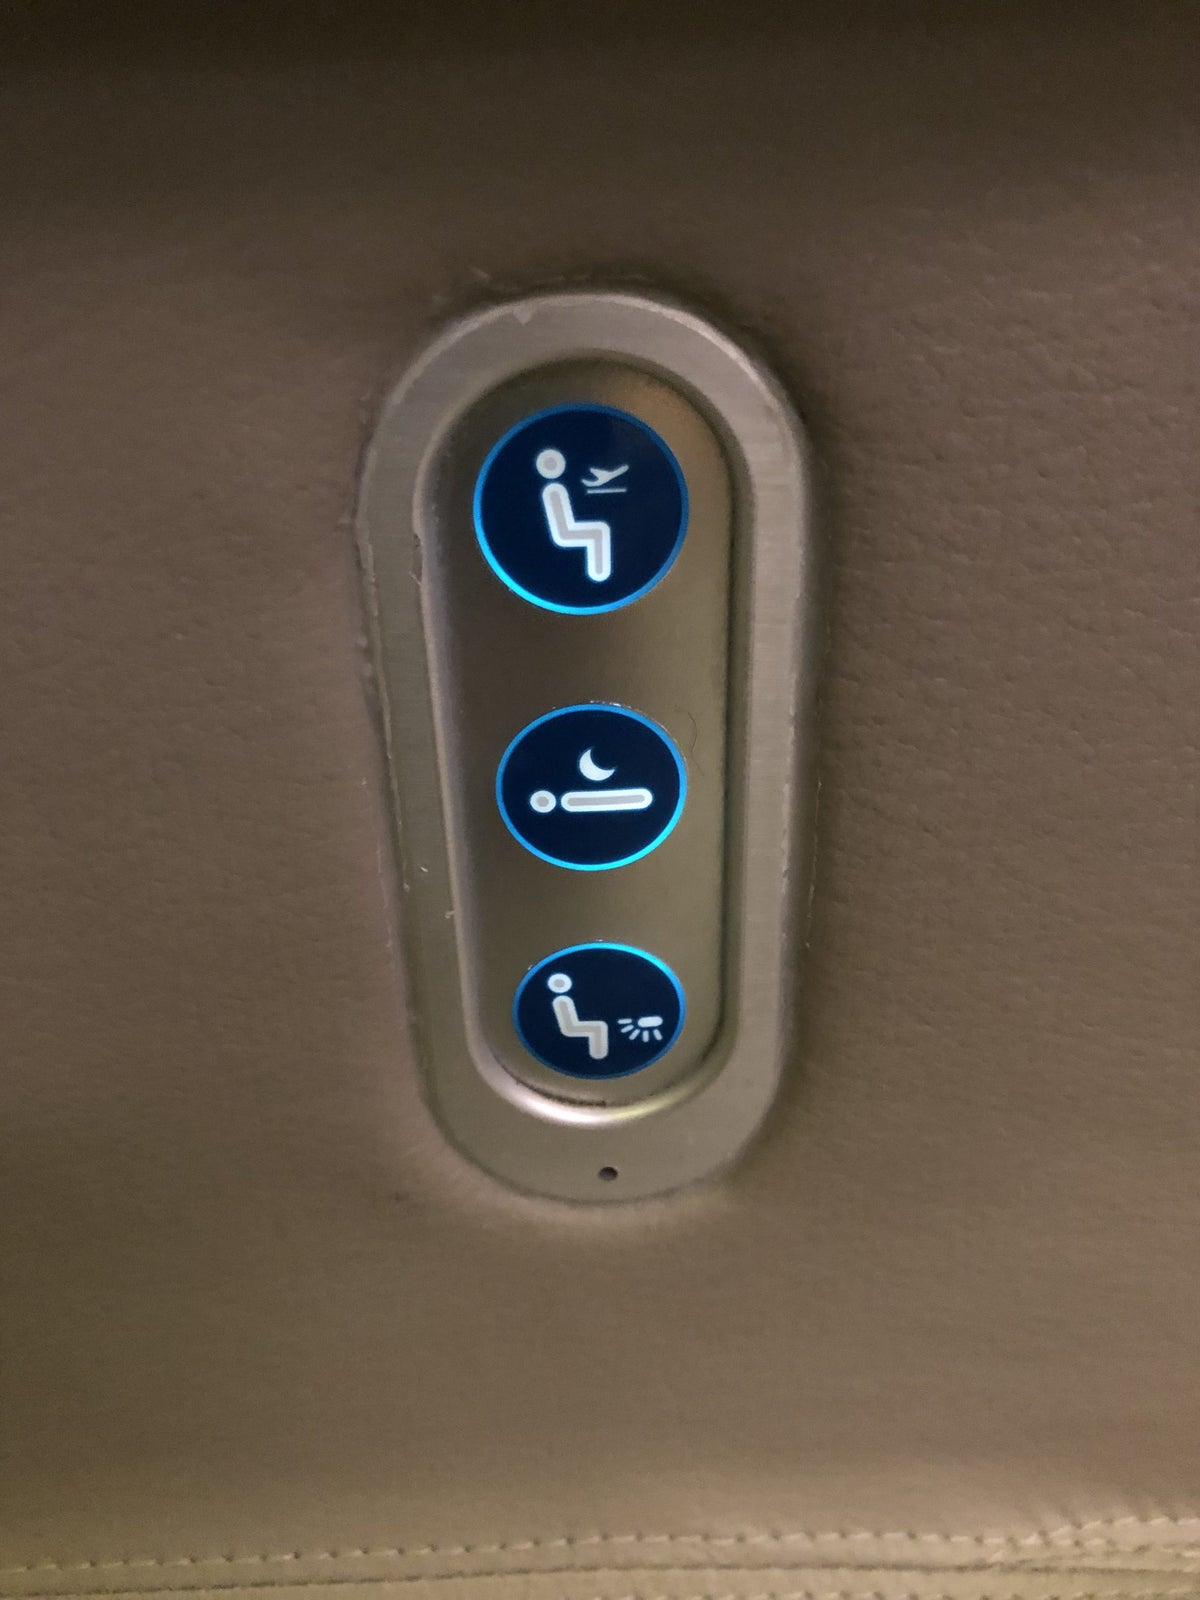 Cathay Pacific 777 first class seat controls